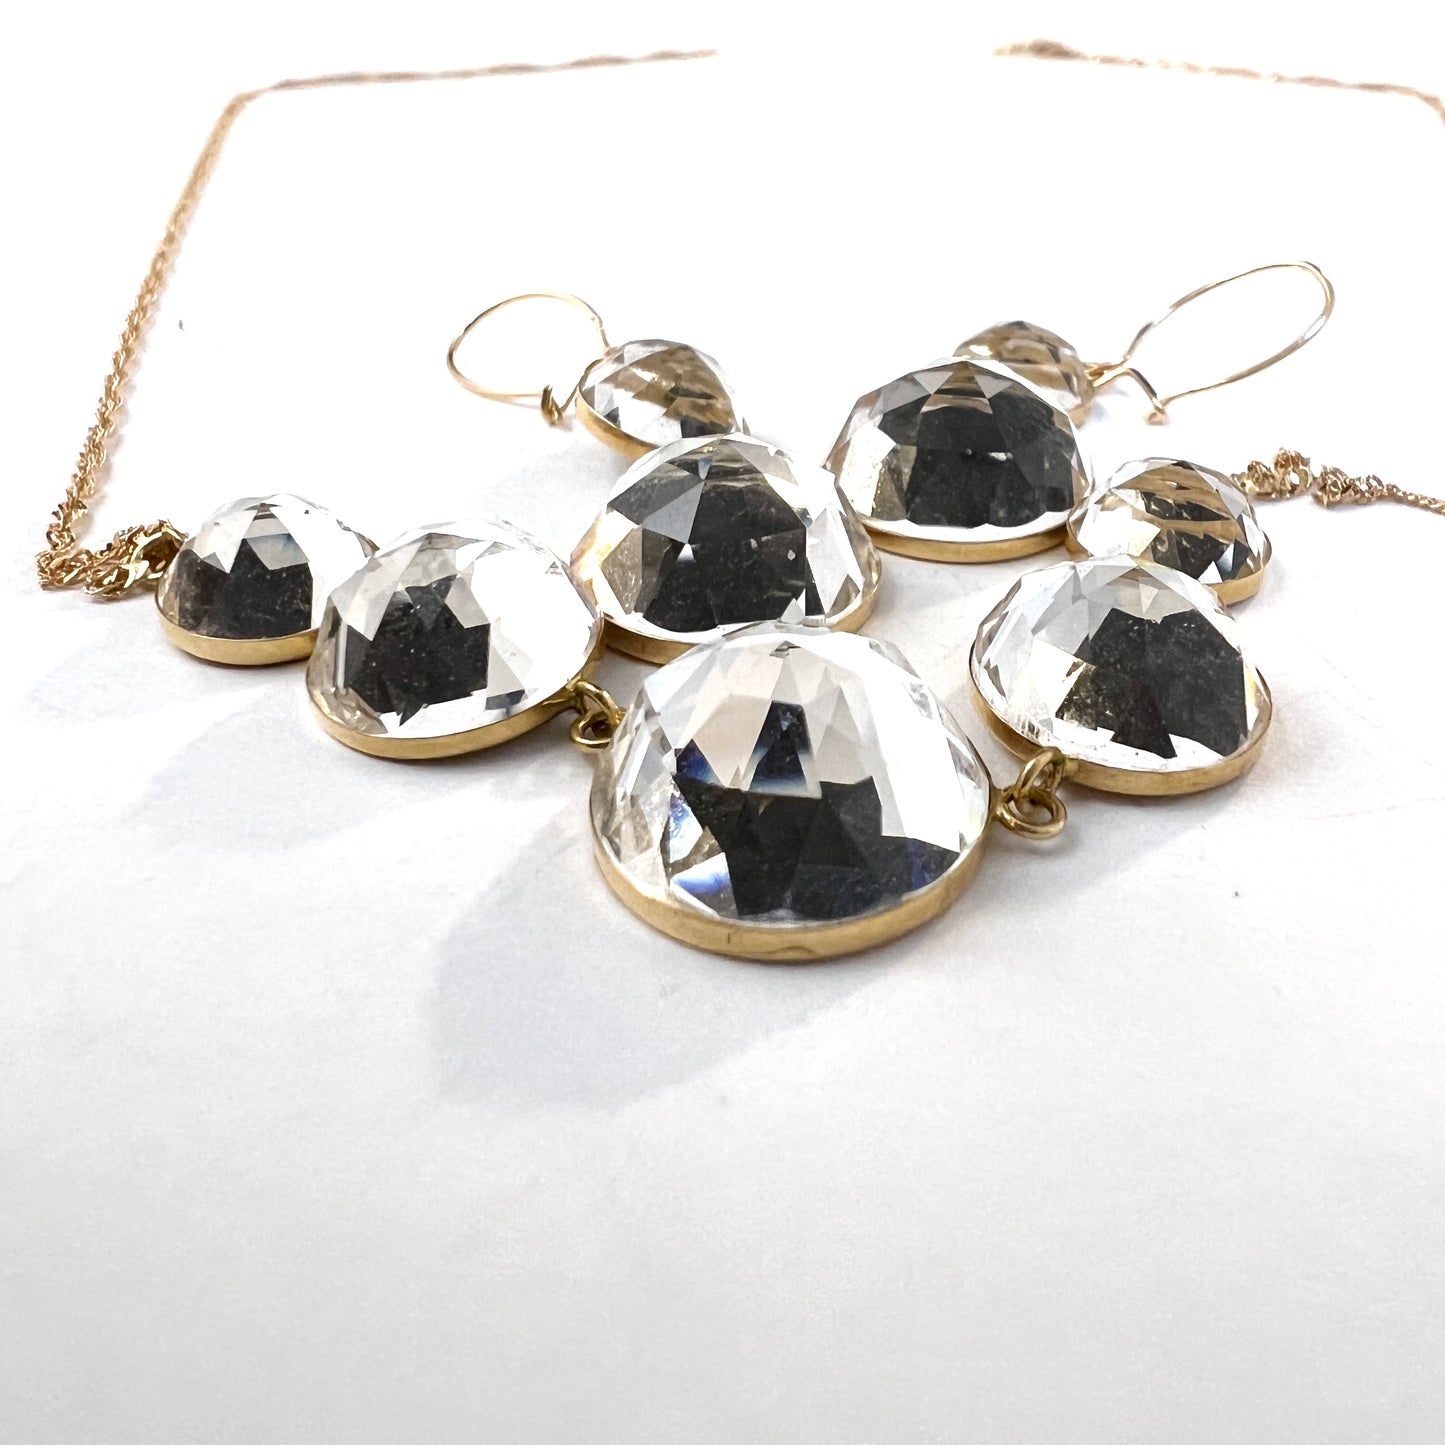 Guldfynd, Sweden. Vintage 18k Gold Foiled Glass Crystal Necklace and Earrings.